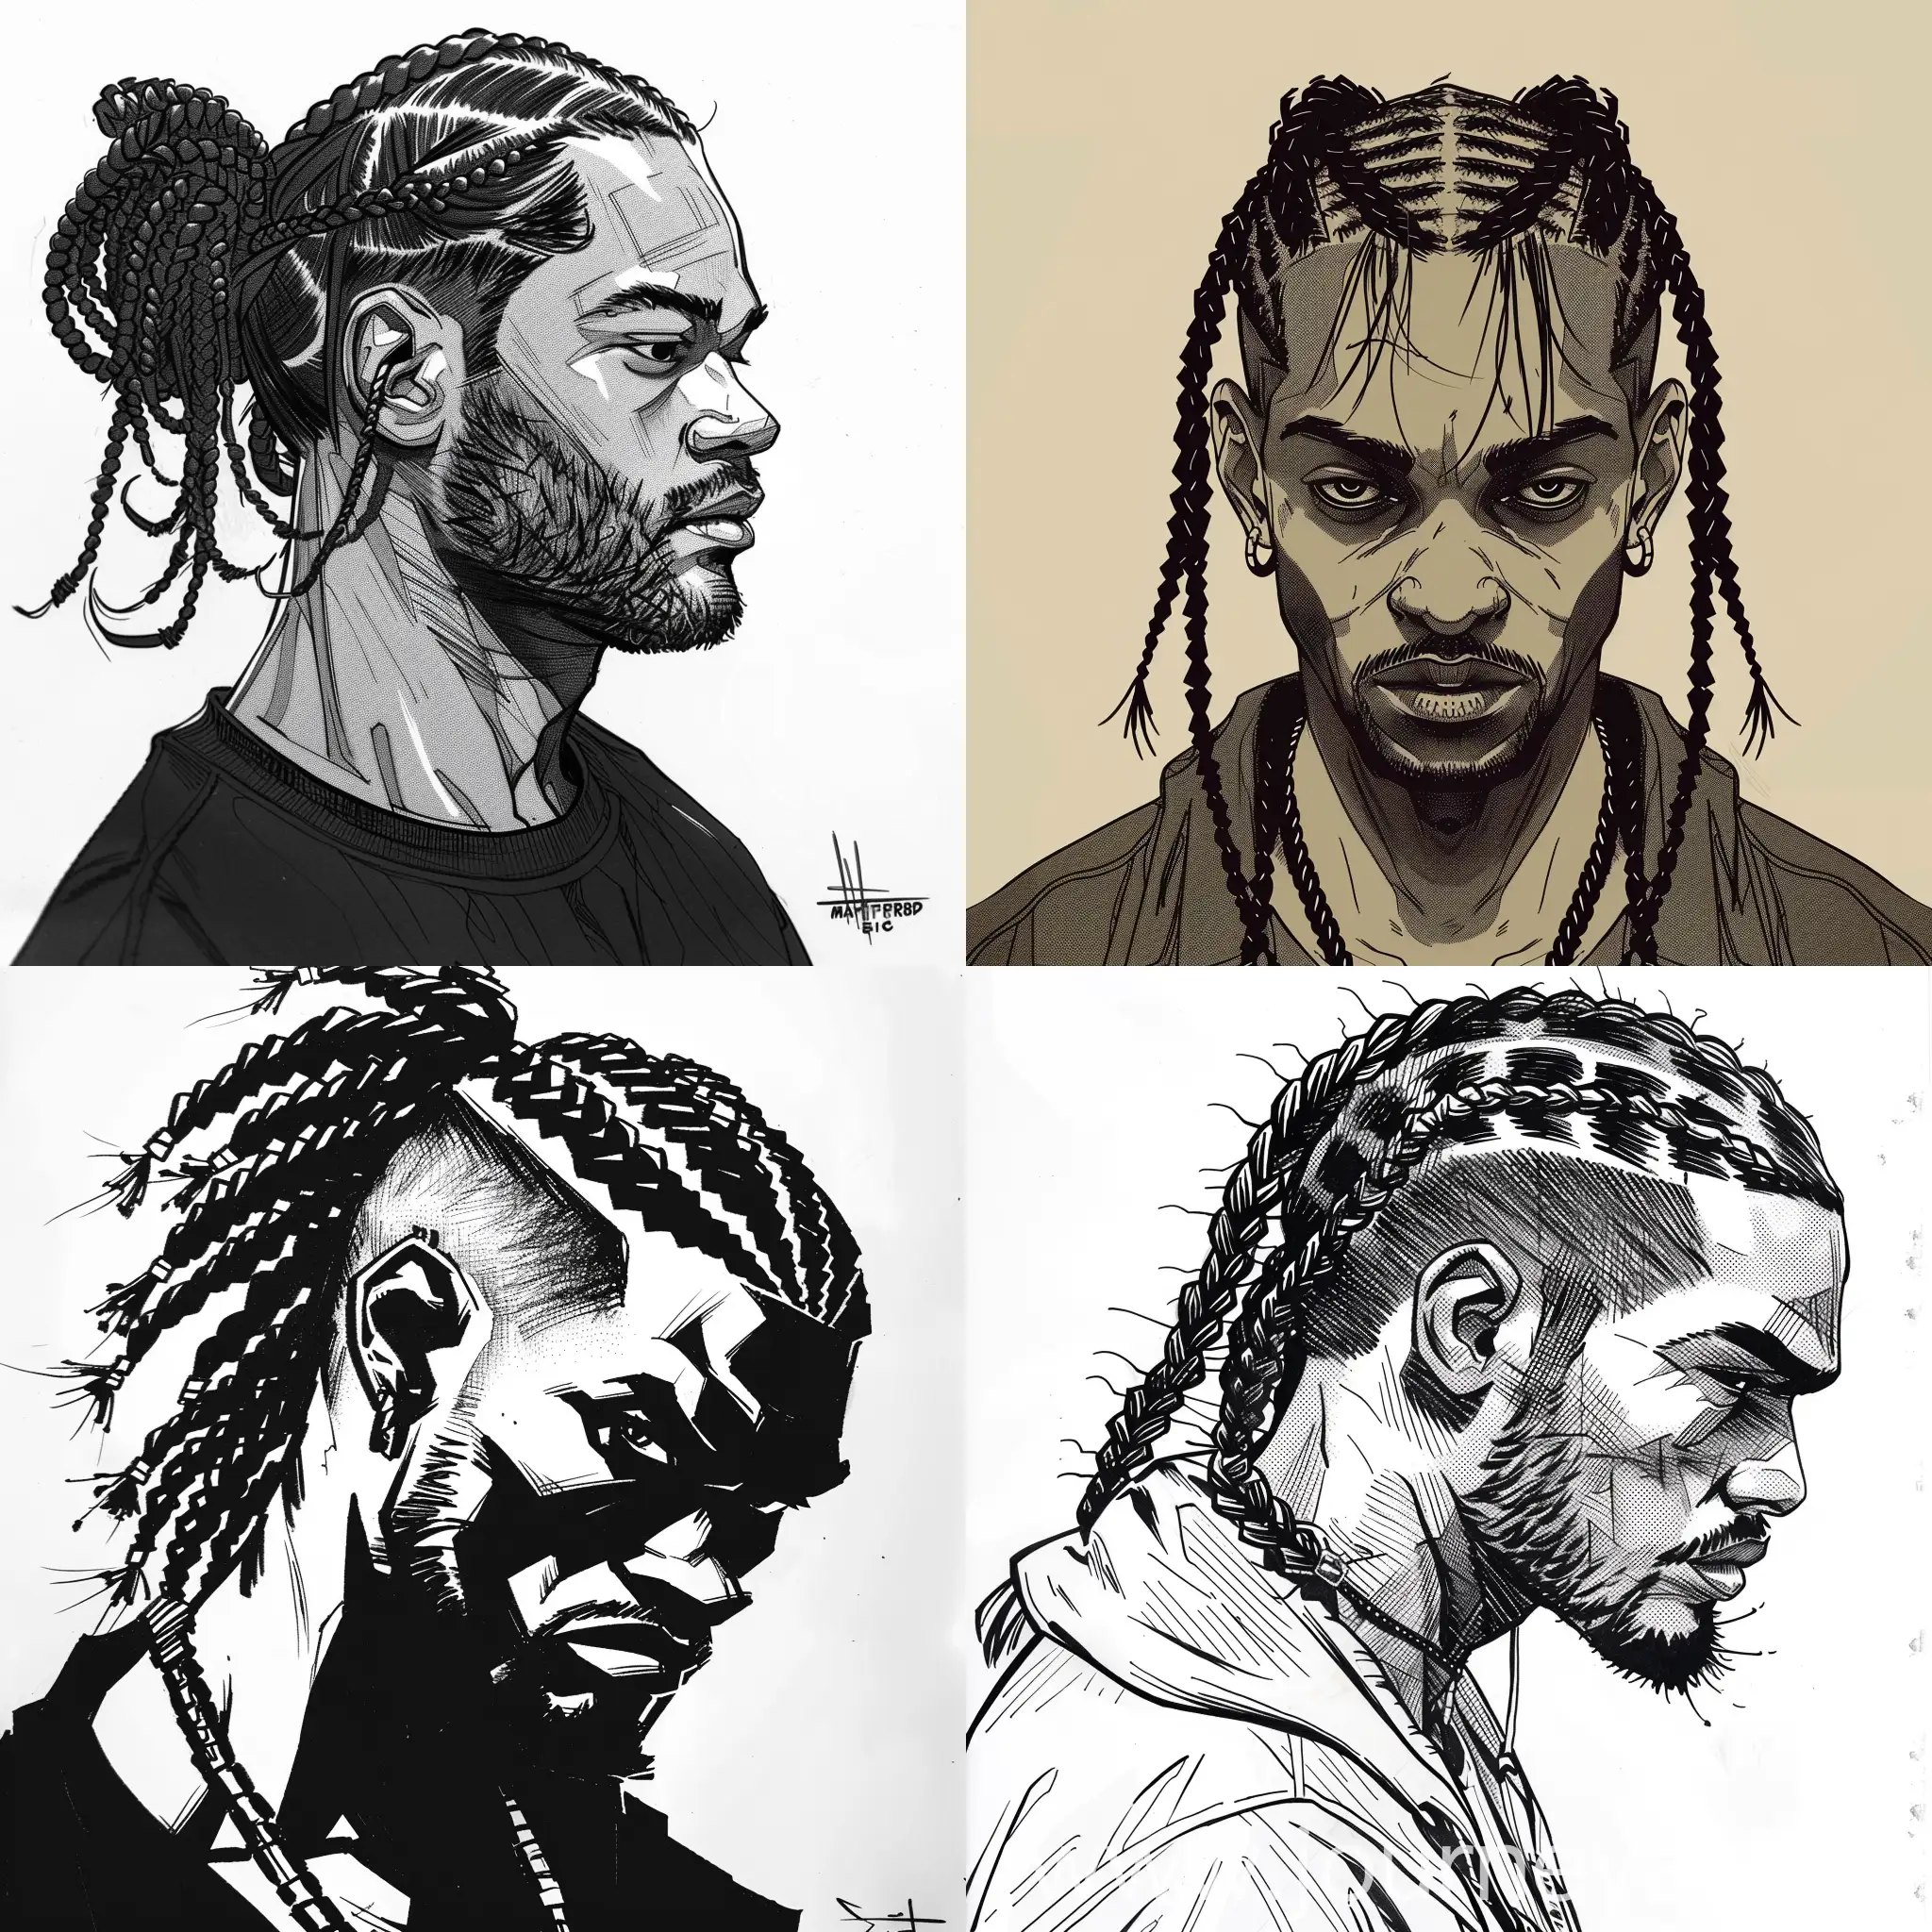 black male, box braids, character art by Matt Fraction, simplistic shading, strong lines, heavy bold linework, animated illustration, I cant believe how beautiful this is, style of hyperrealistic fantasy, cartoon/anime/comic/graphic novel inspired